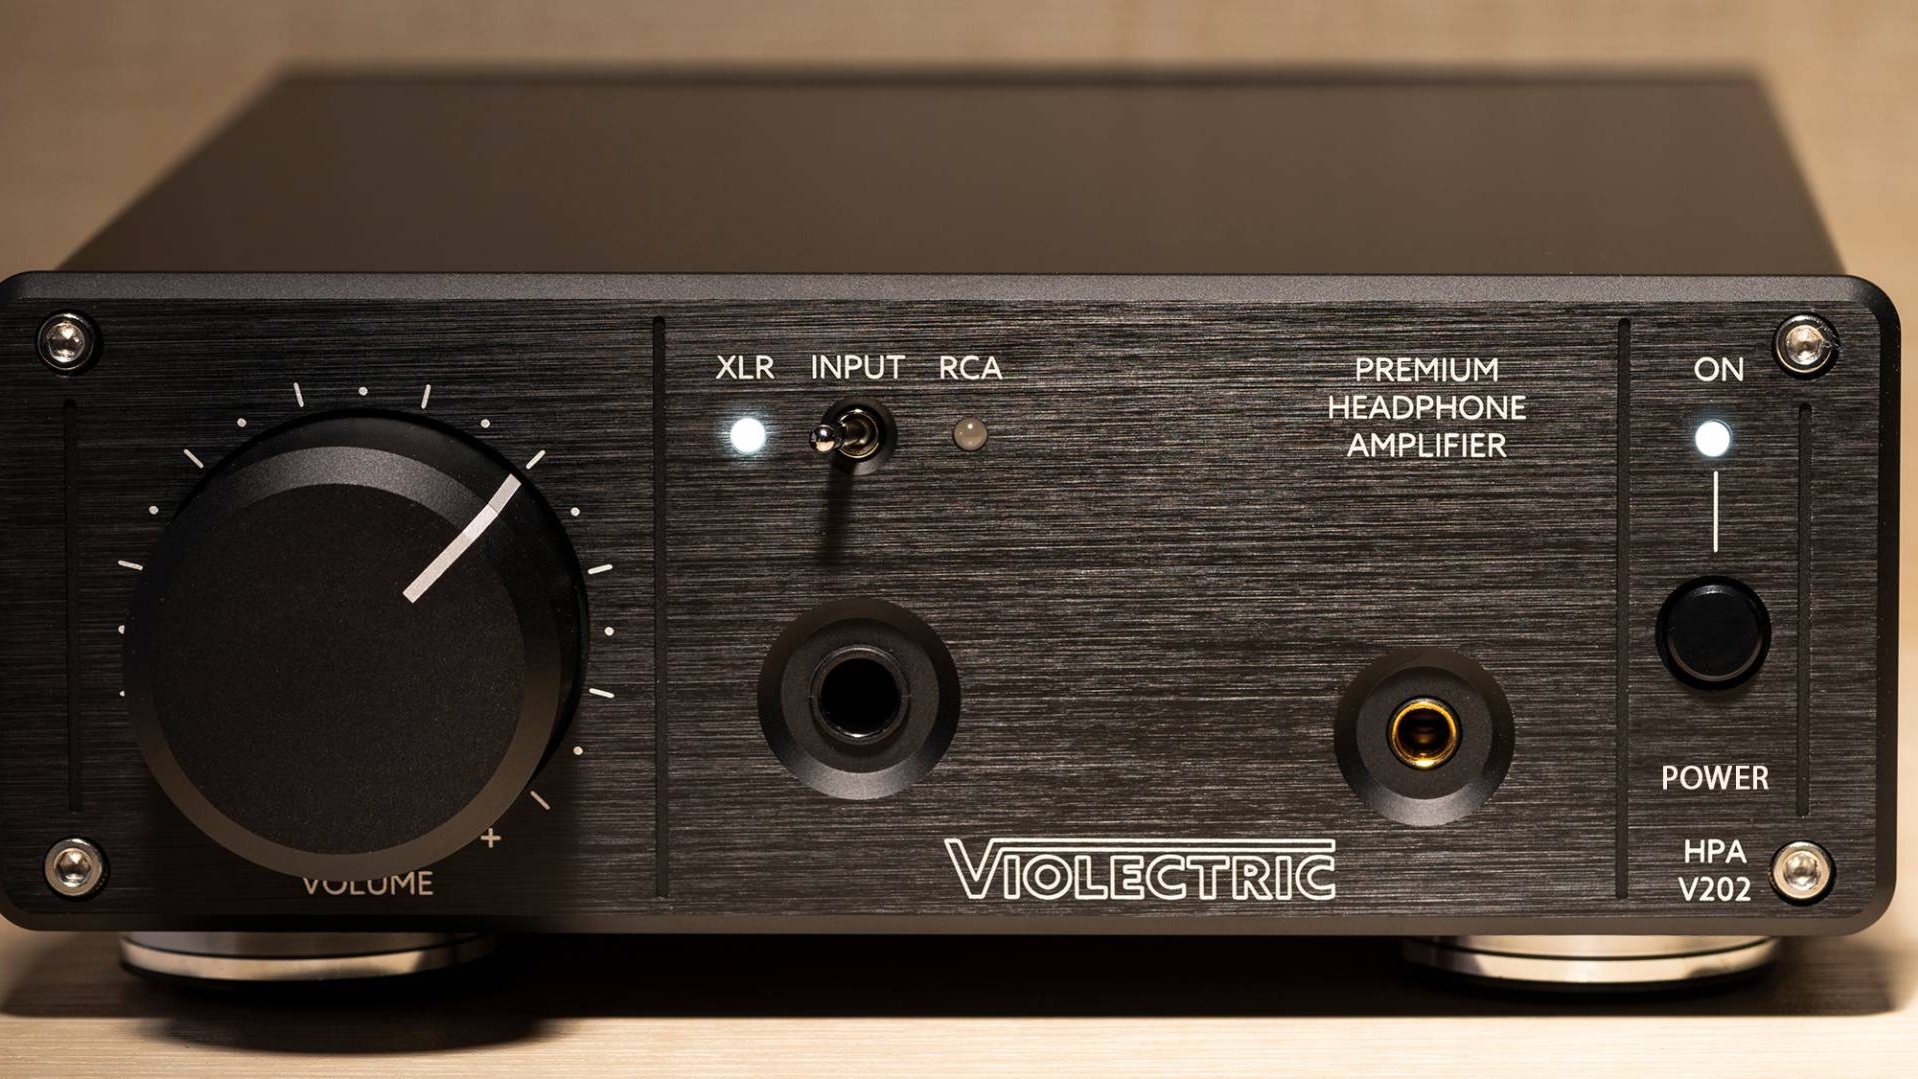 Violectric HPA-V202 Frontal View (Image Credit: cma / Violectric)